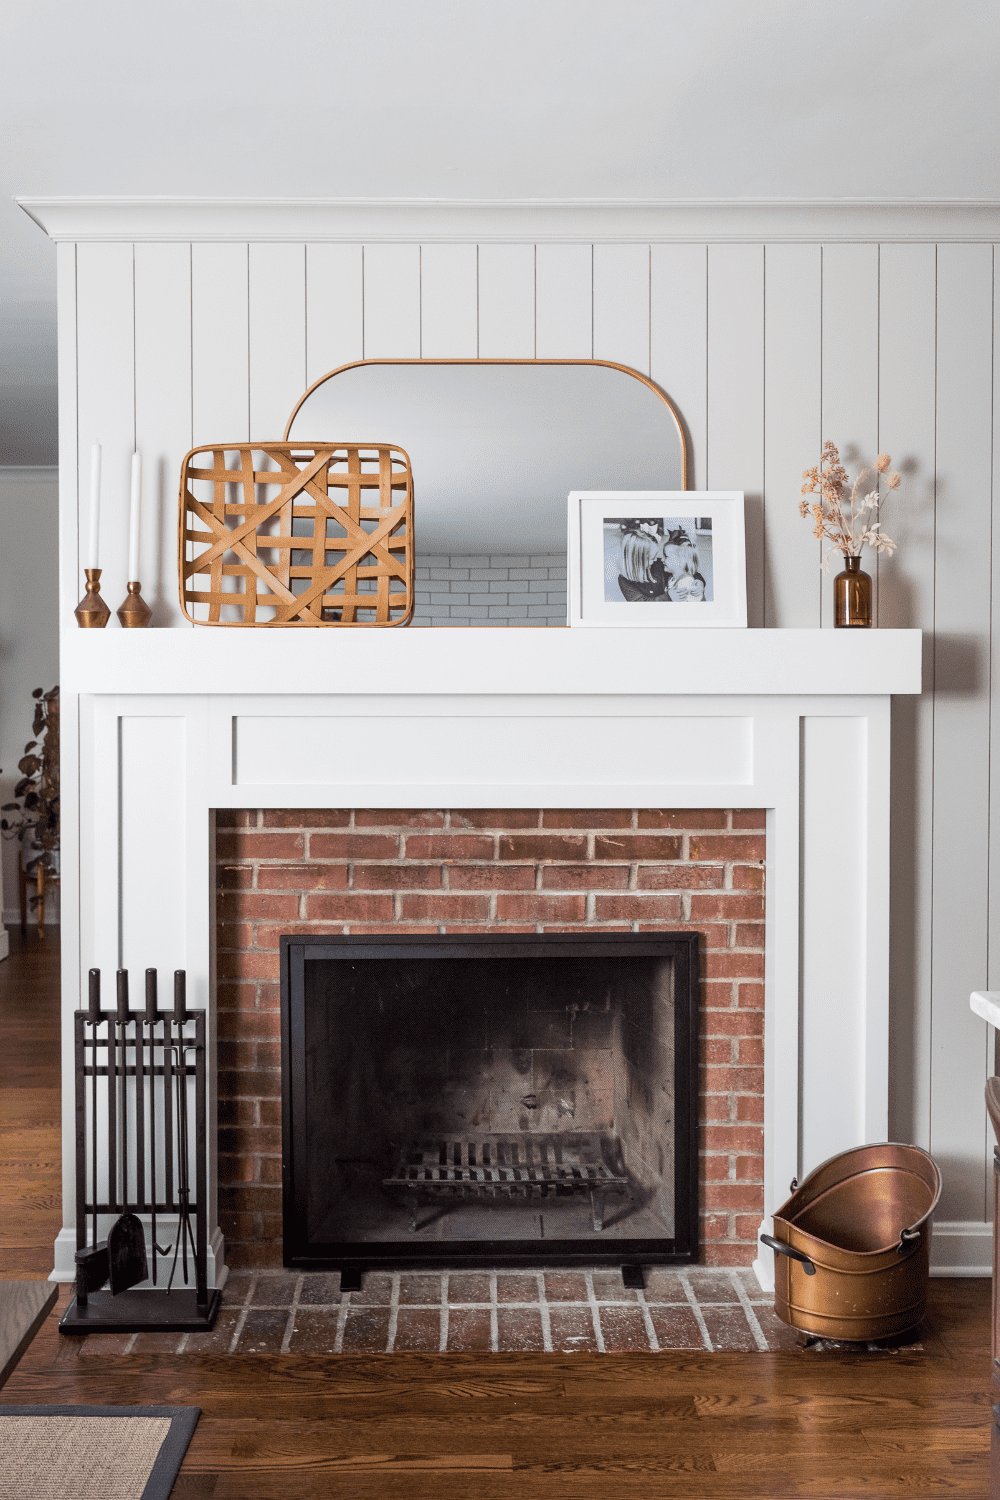 Nicholas Design Build | A fireplace in a living room.